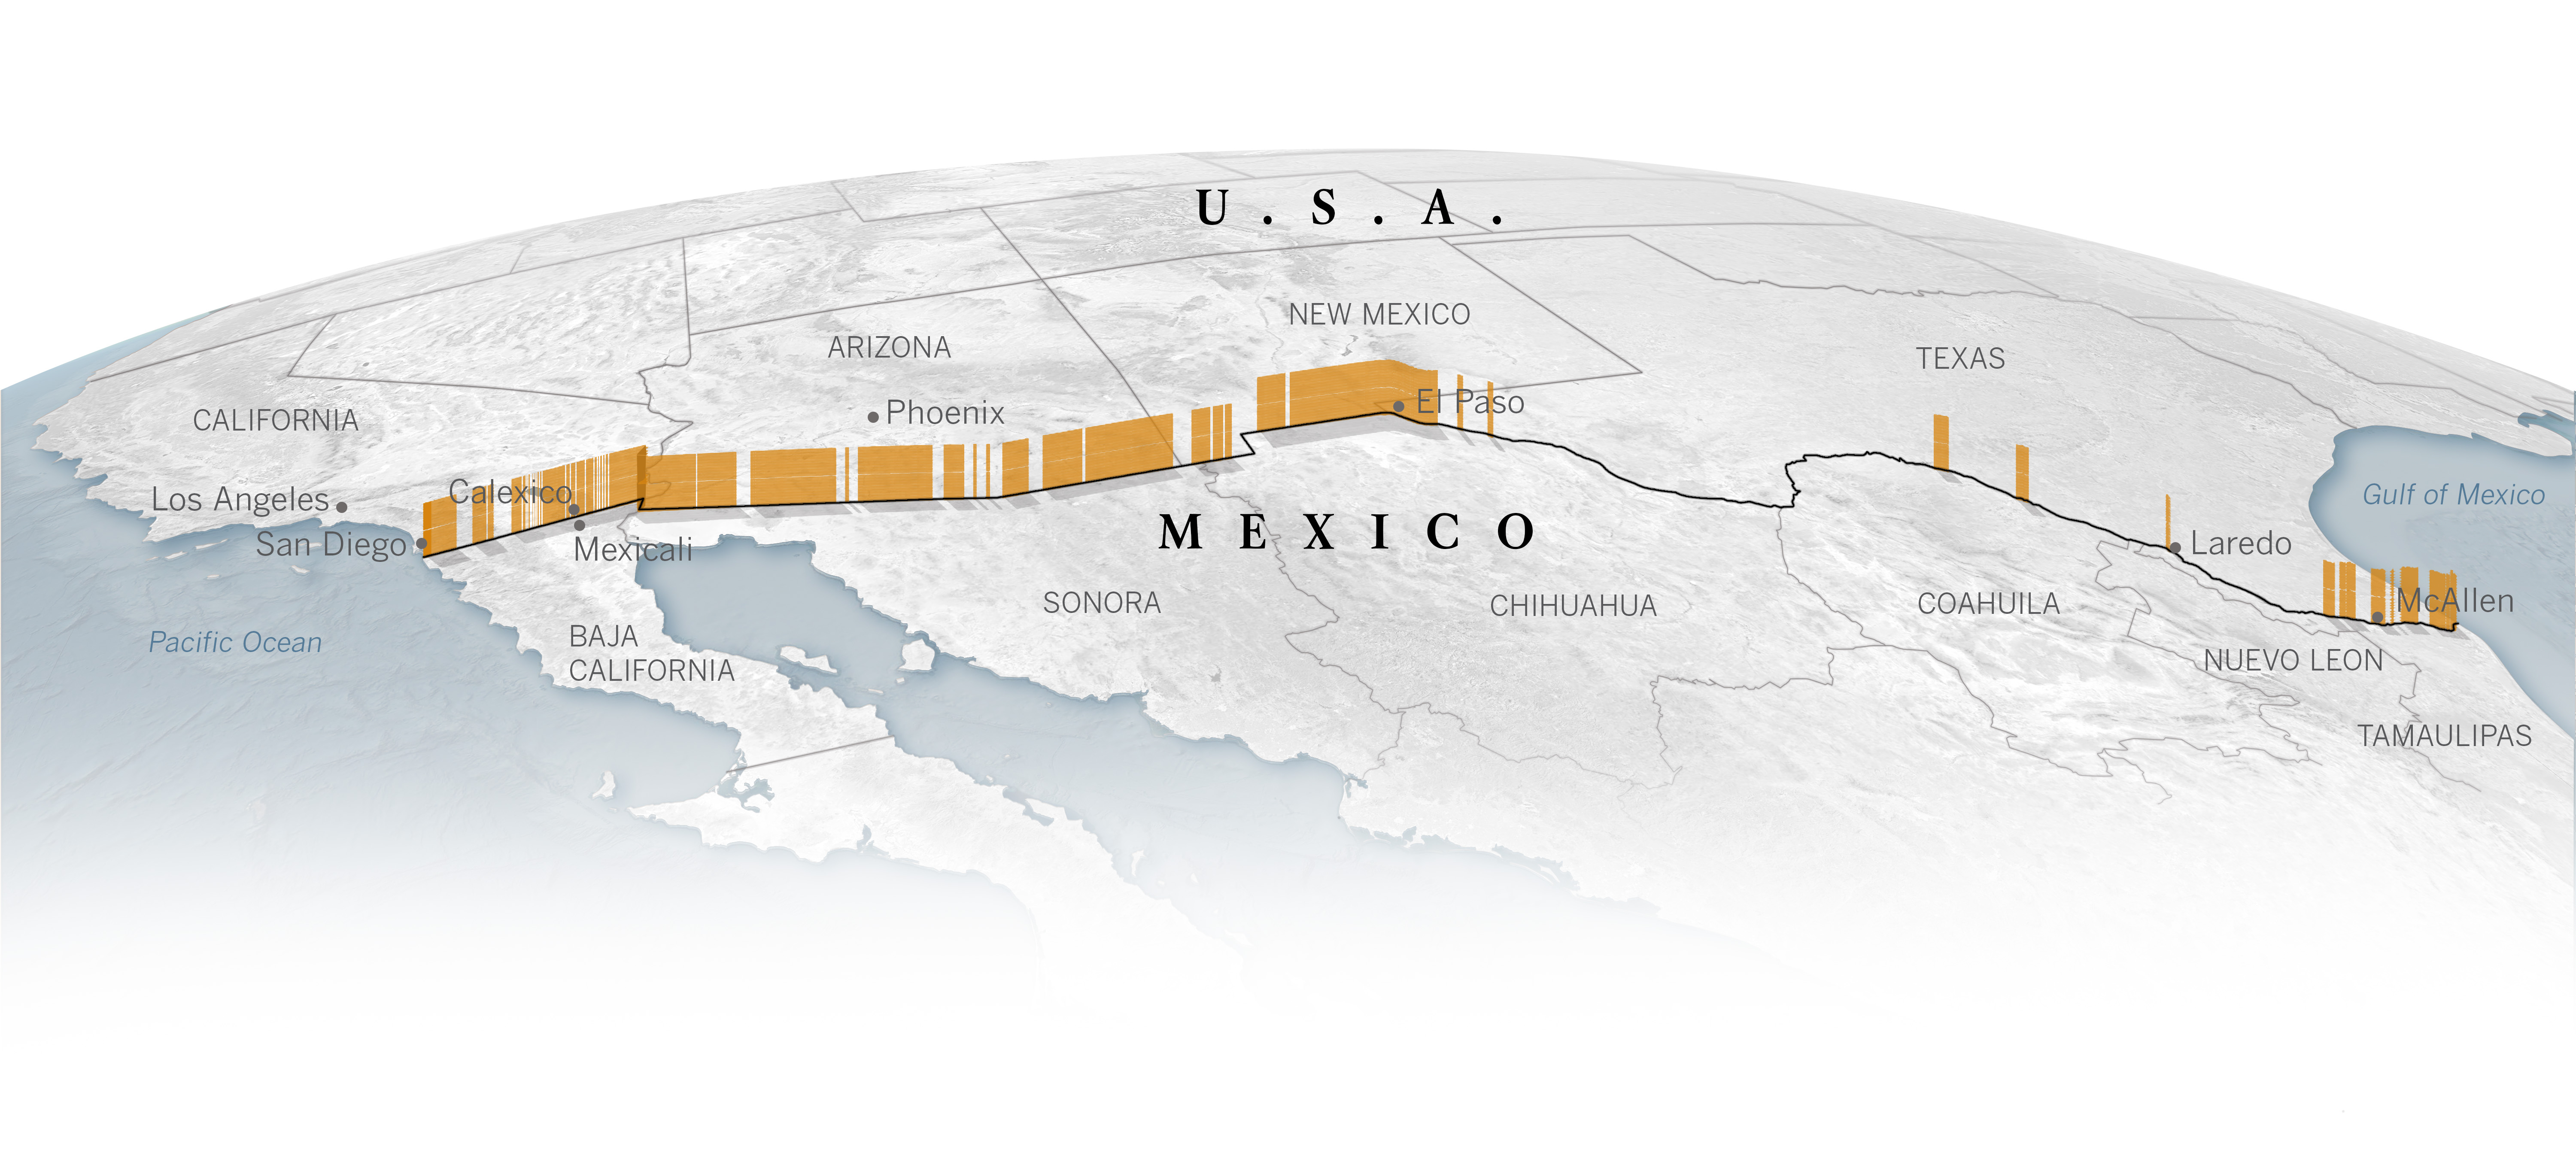 5 misconceptions about the U.S.-Mexico border - Los Angeles Times